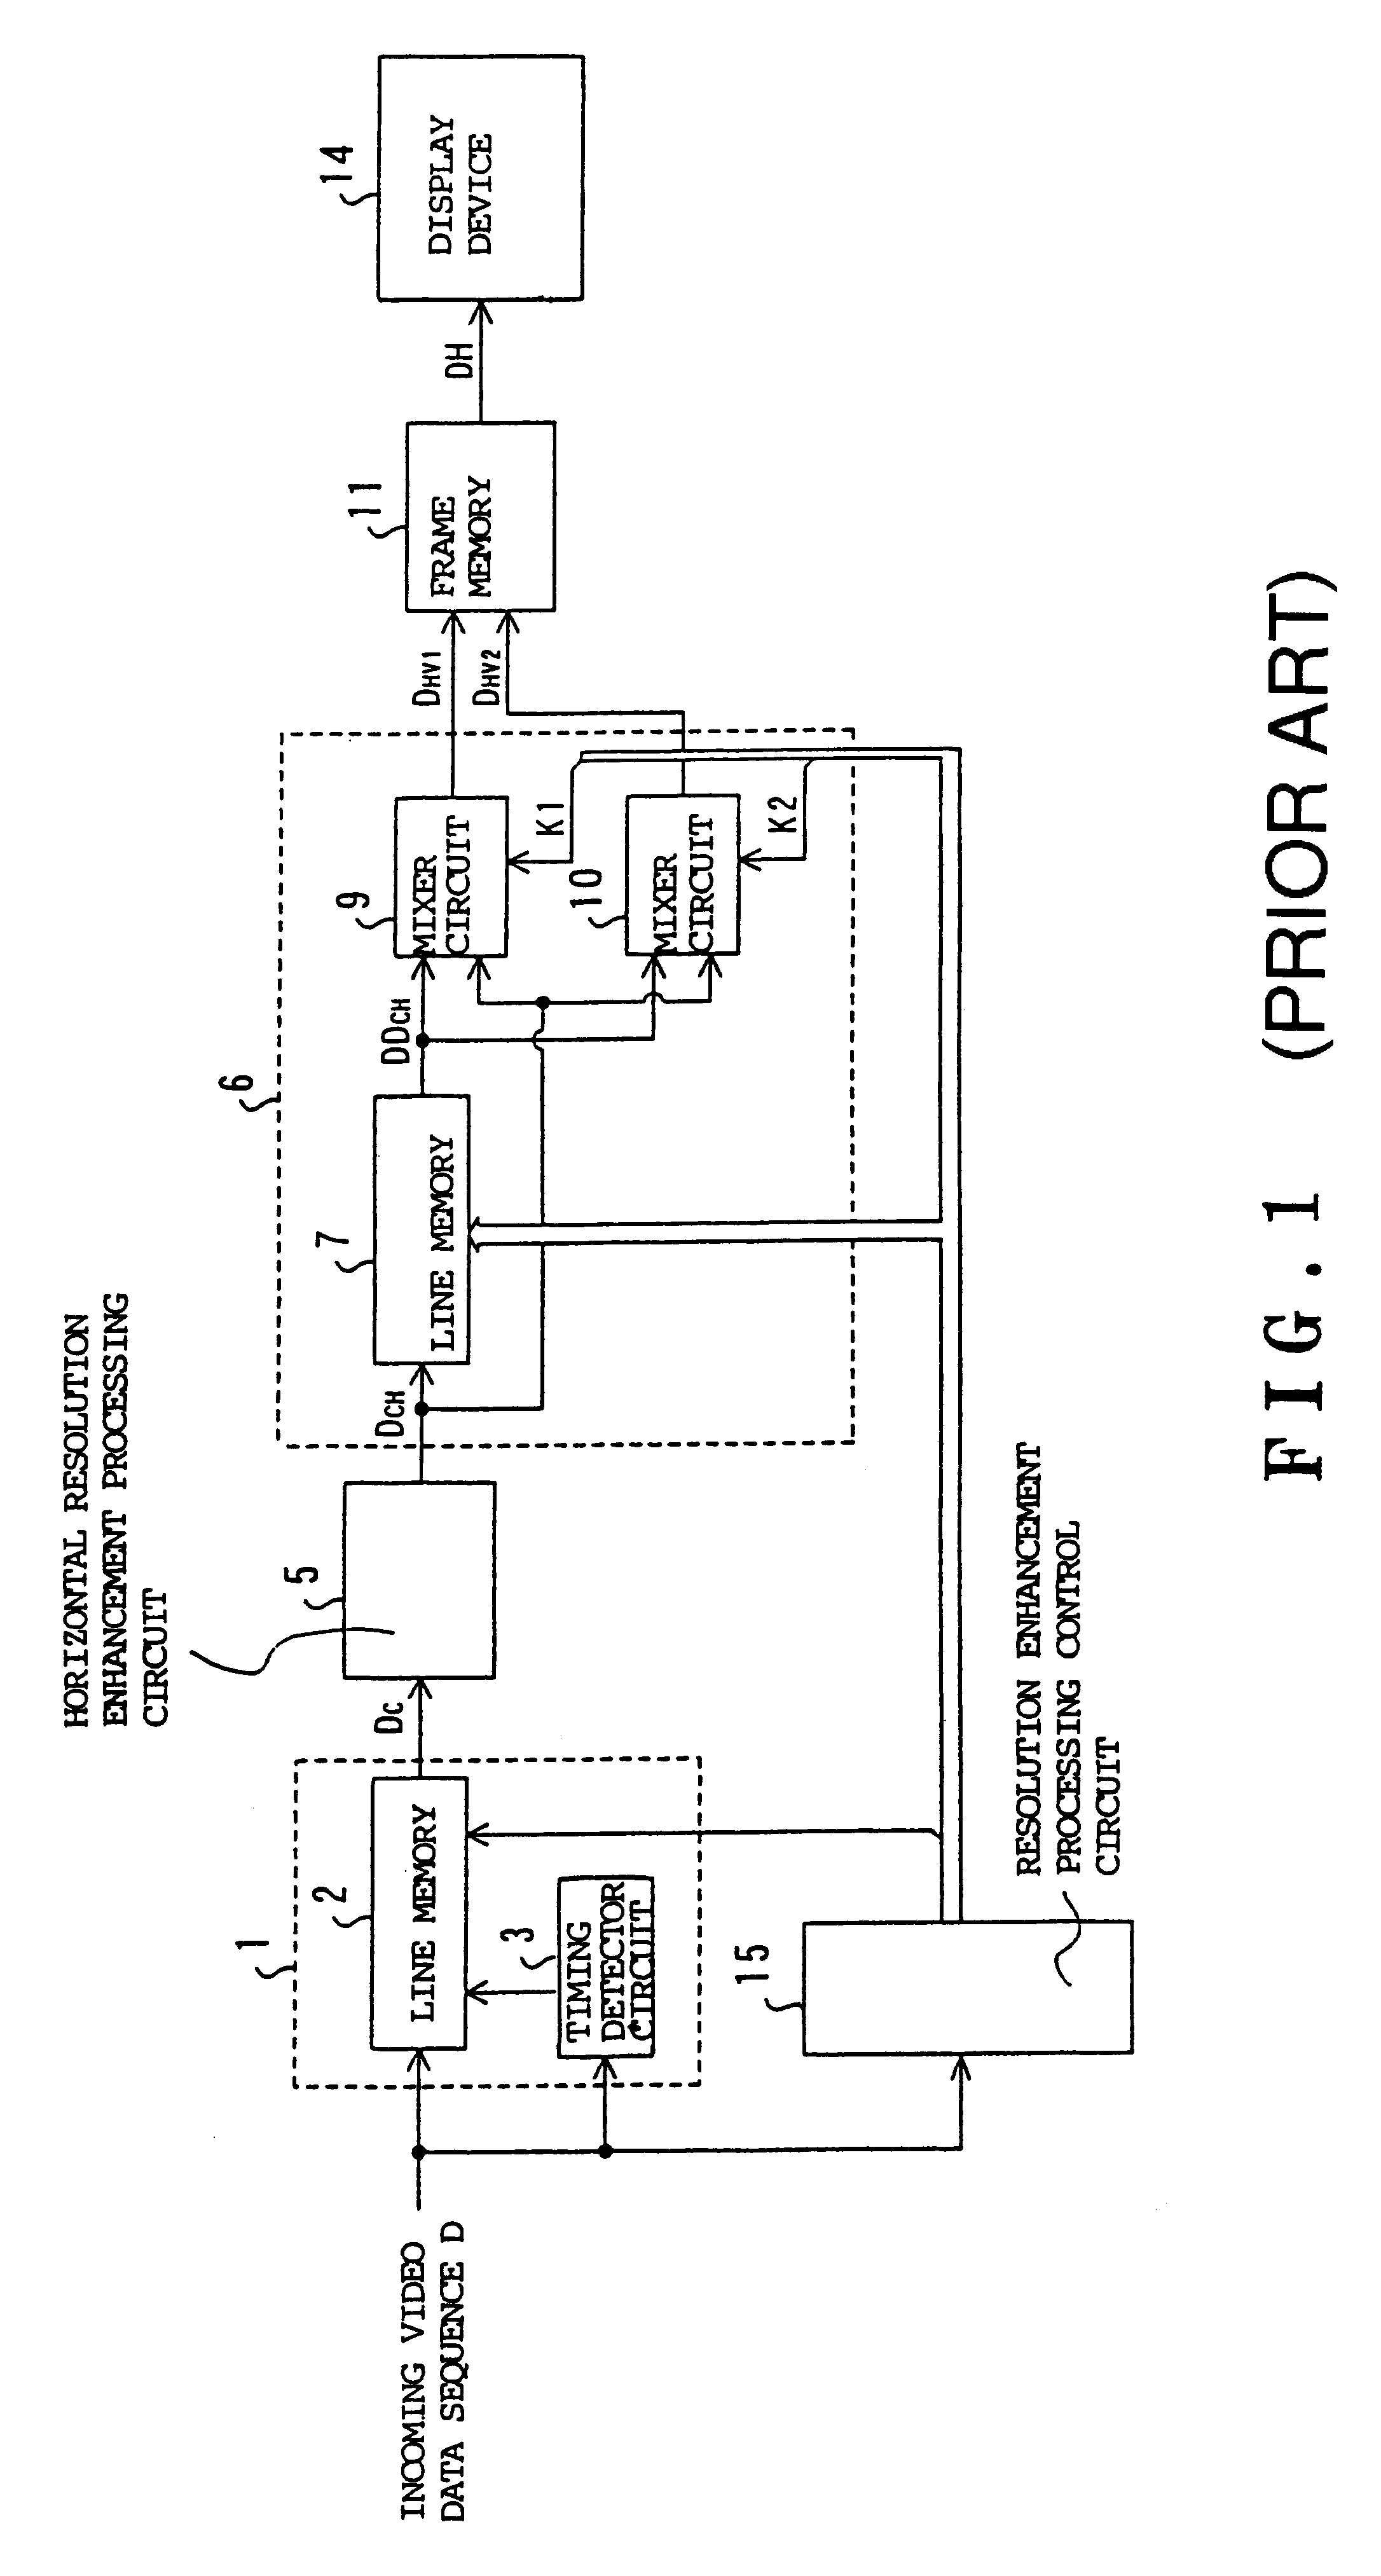 Video signal processing apparatus with resolution enhancing feature